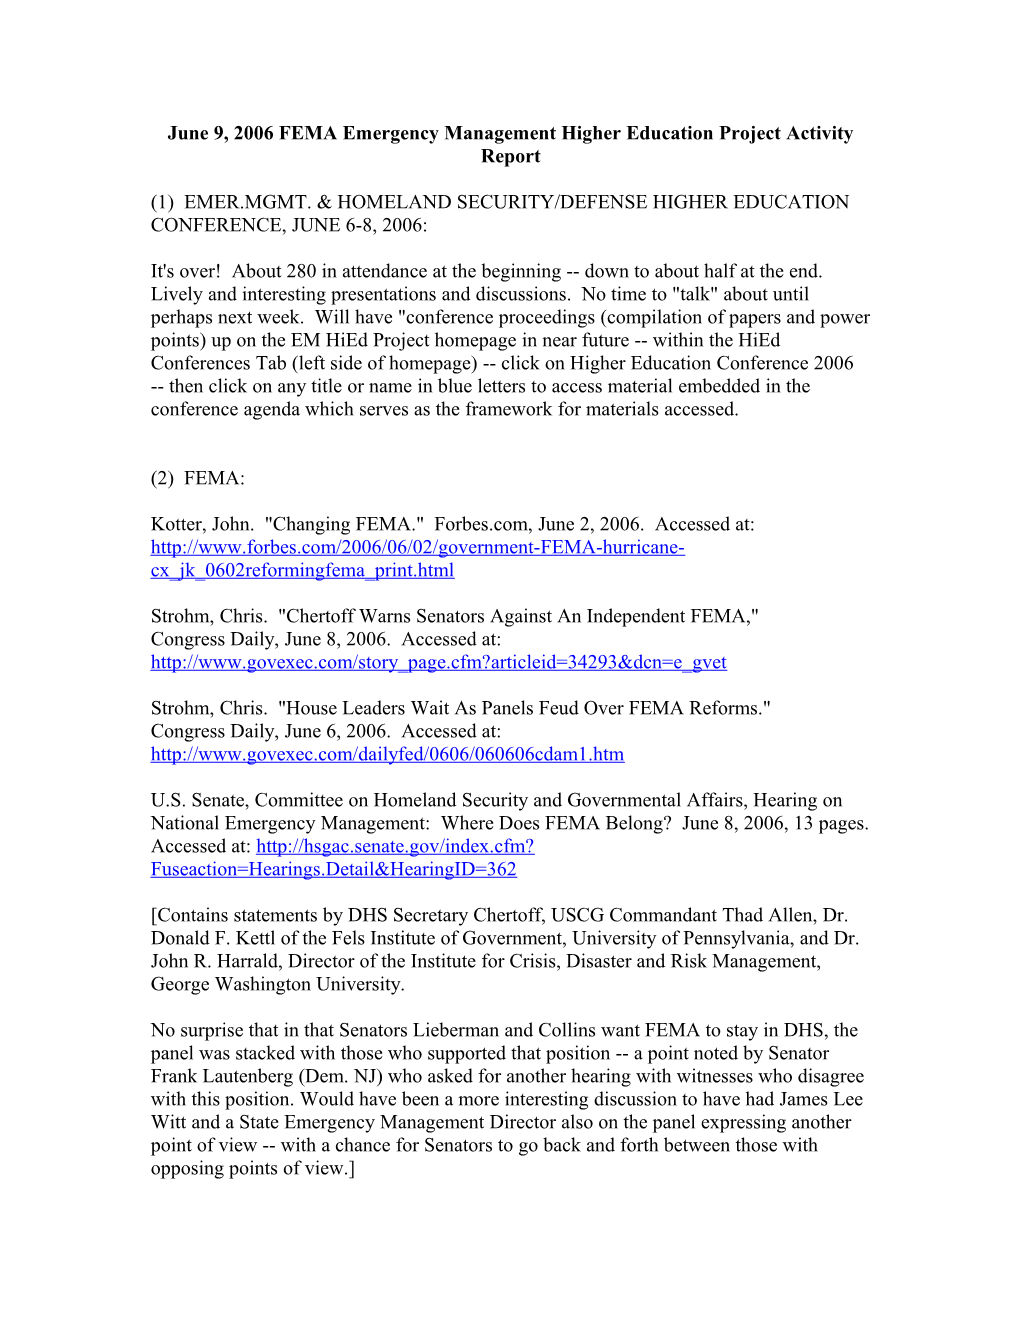 June 9, 2006 FEMA Emergency Management Higher Education Project Activity Report